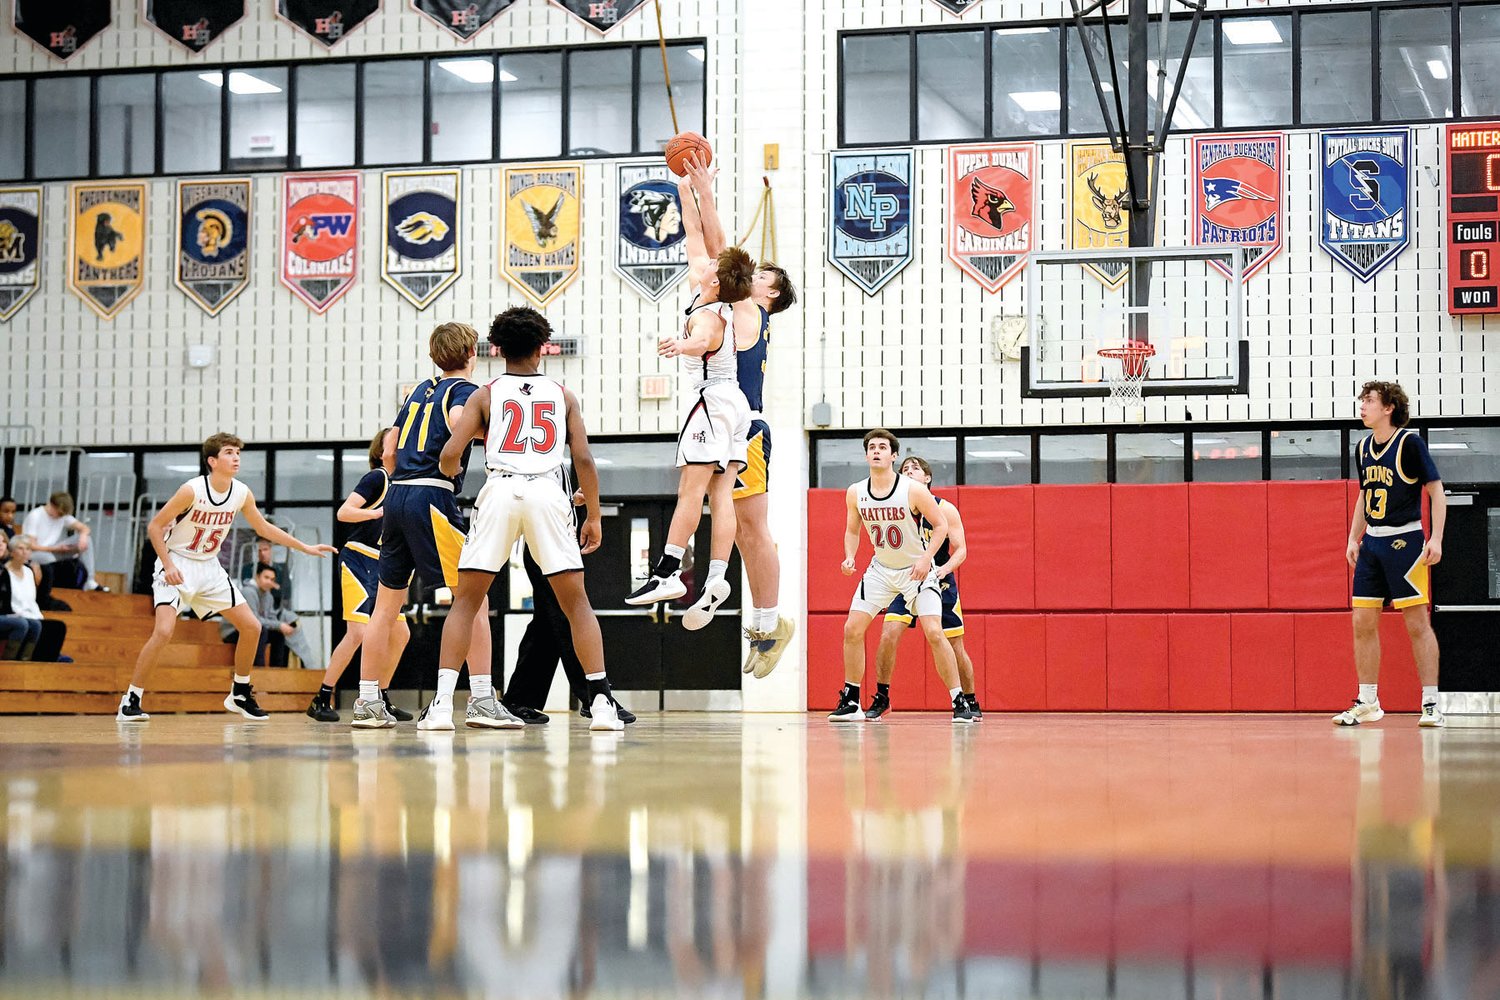 Hatboro-Horsham took the opening tipoff and never looked back, breezing to a 54-20 victory.